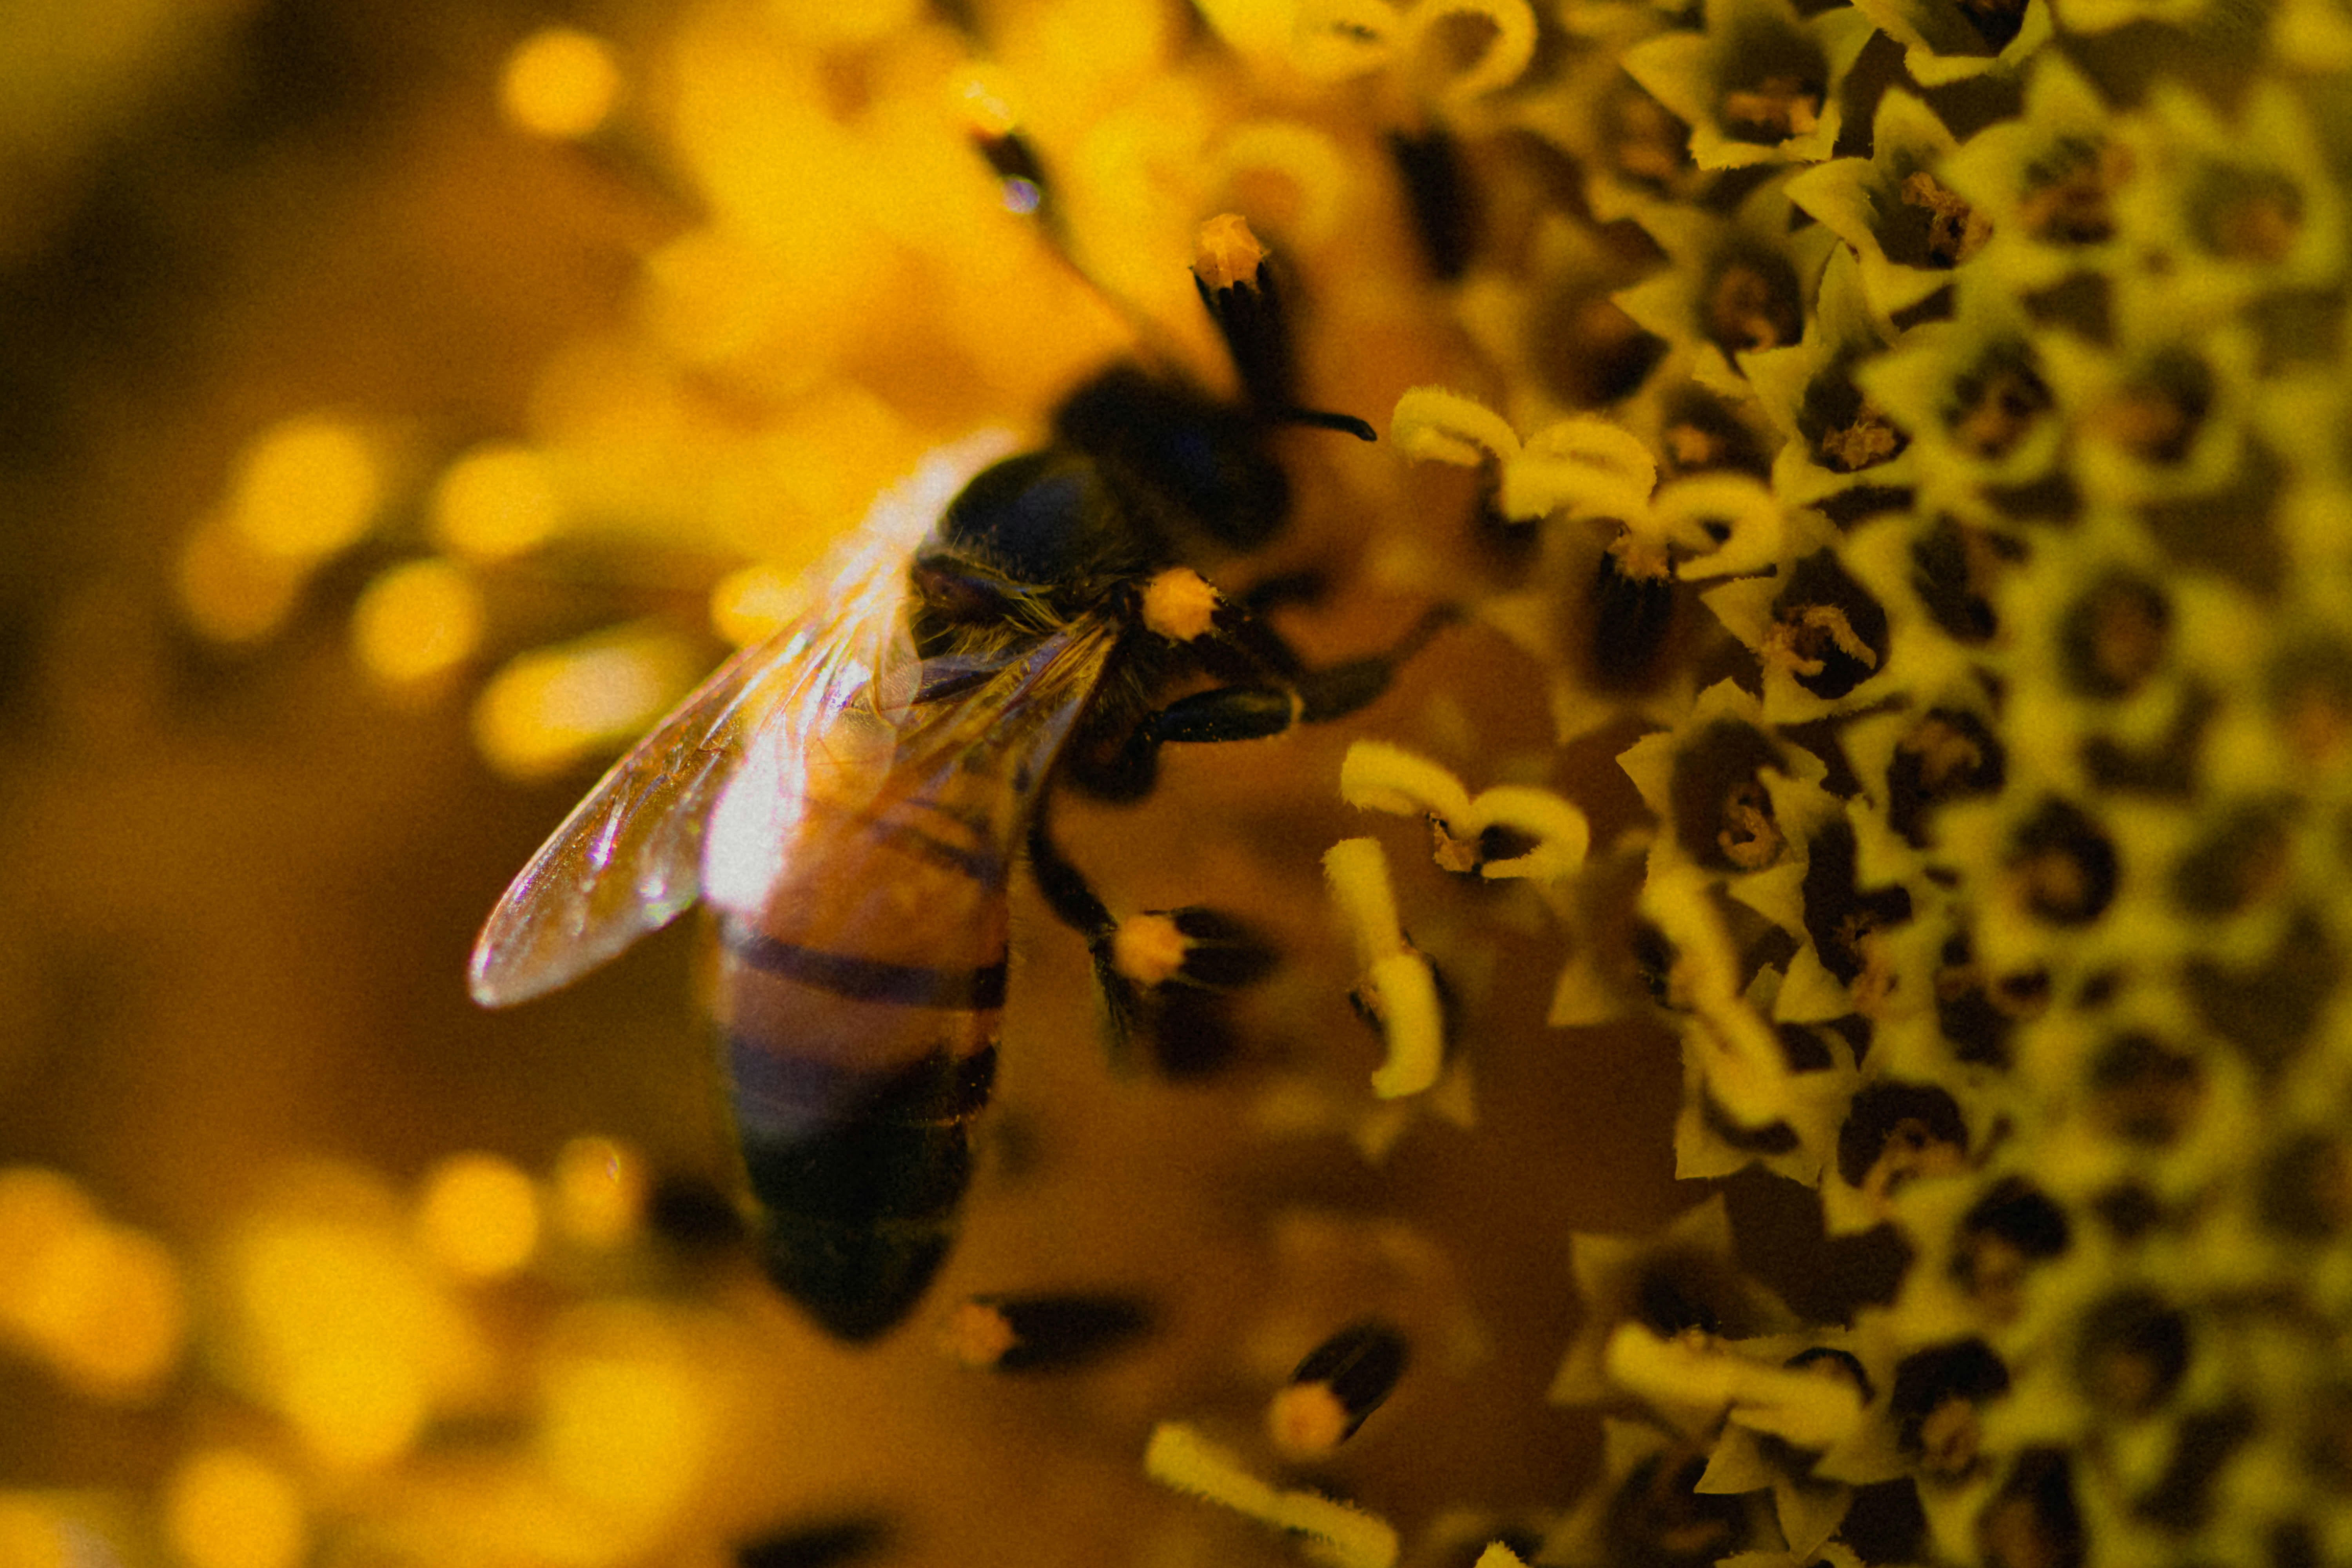 honeybee perched on yellow flower in close up photography during daytime